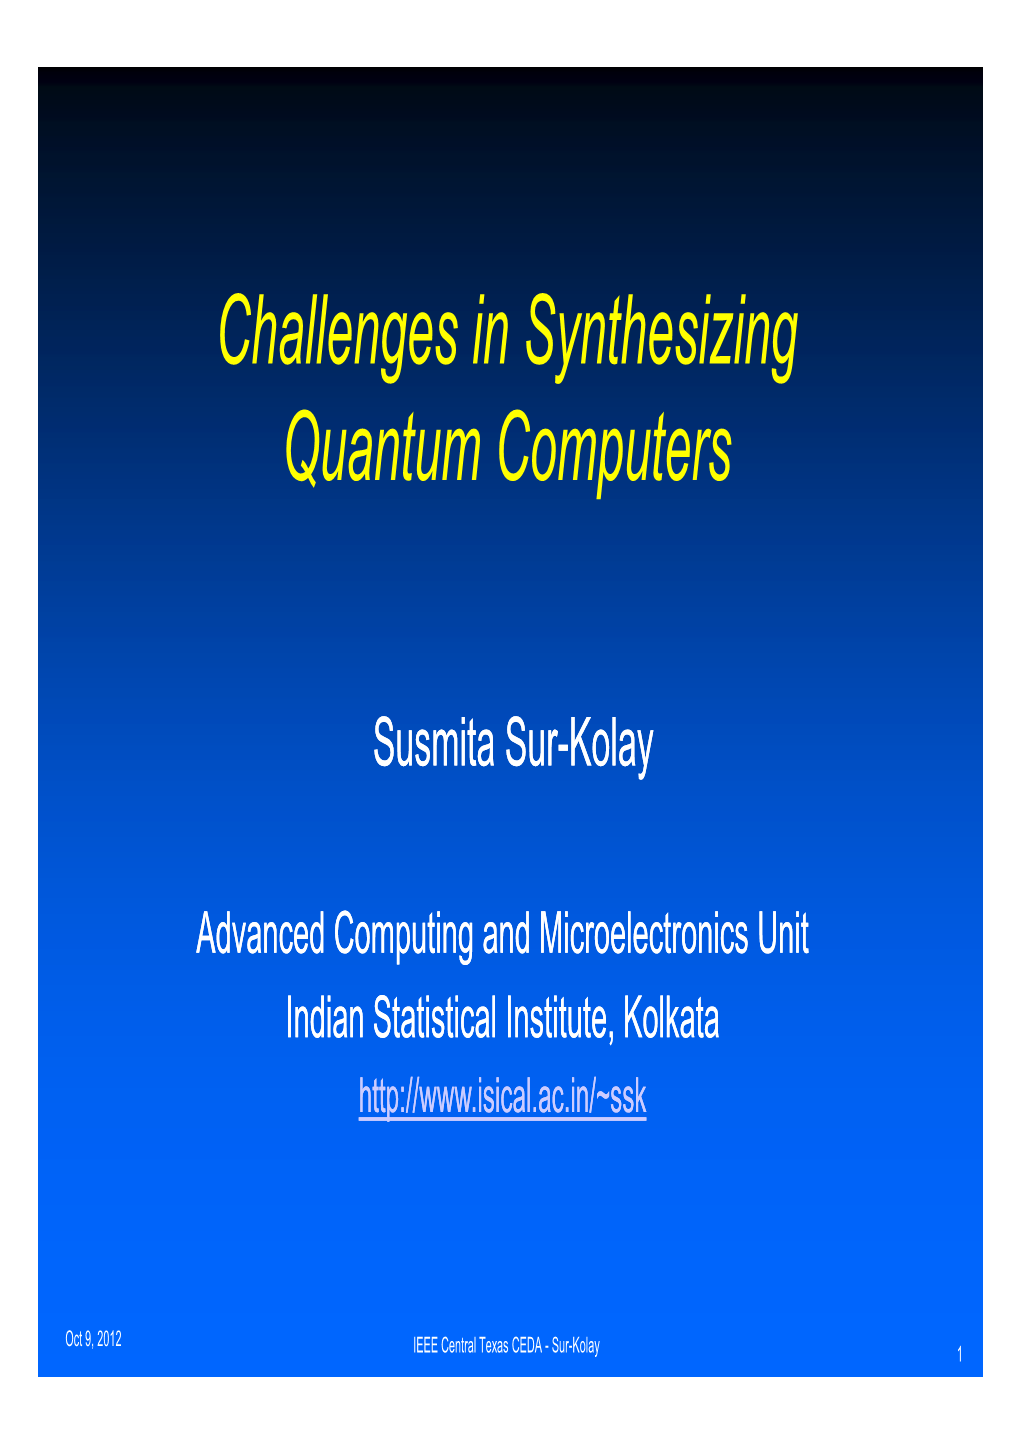 Challenges in Synthesizing Quantum Computers